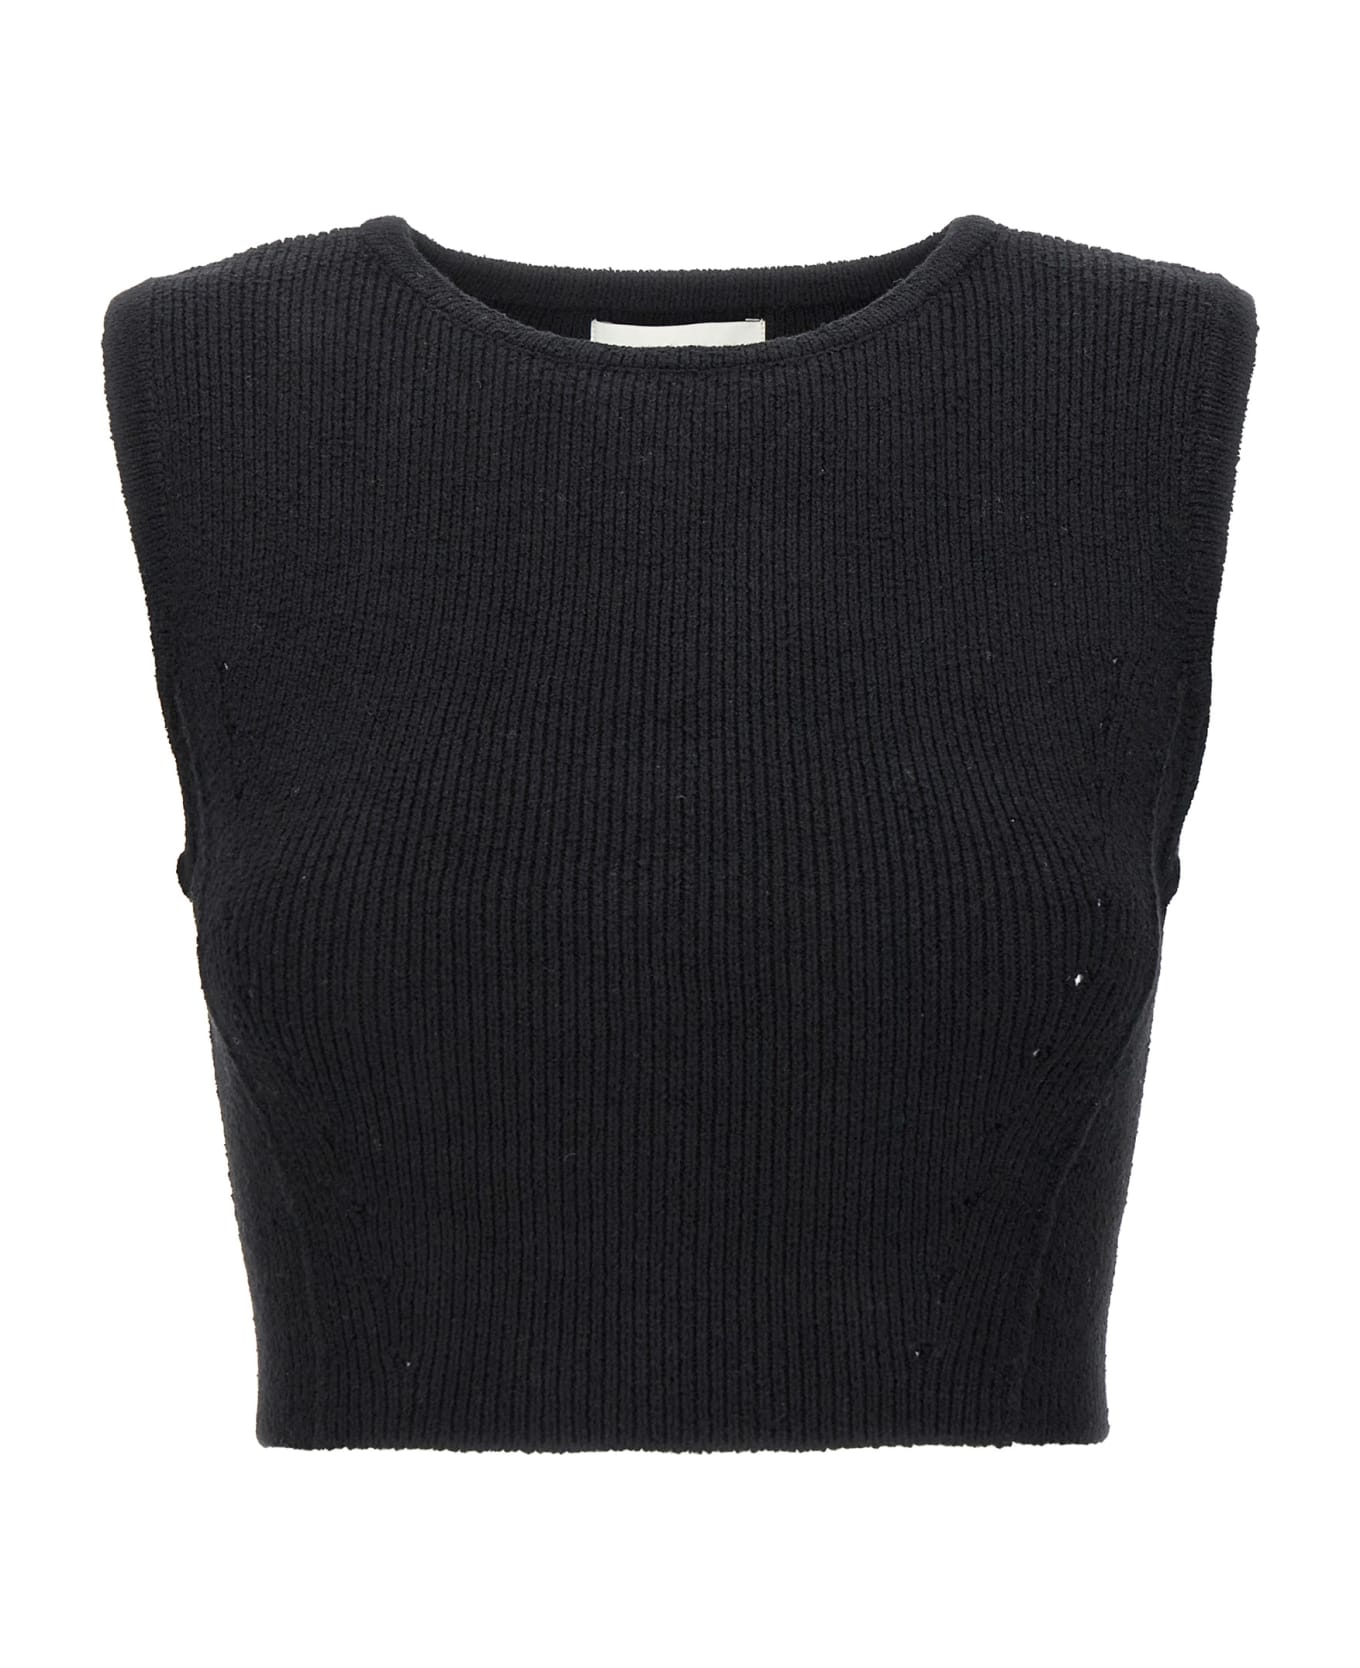 Loulou Studio 'chace' Top - Black  